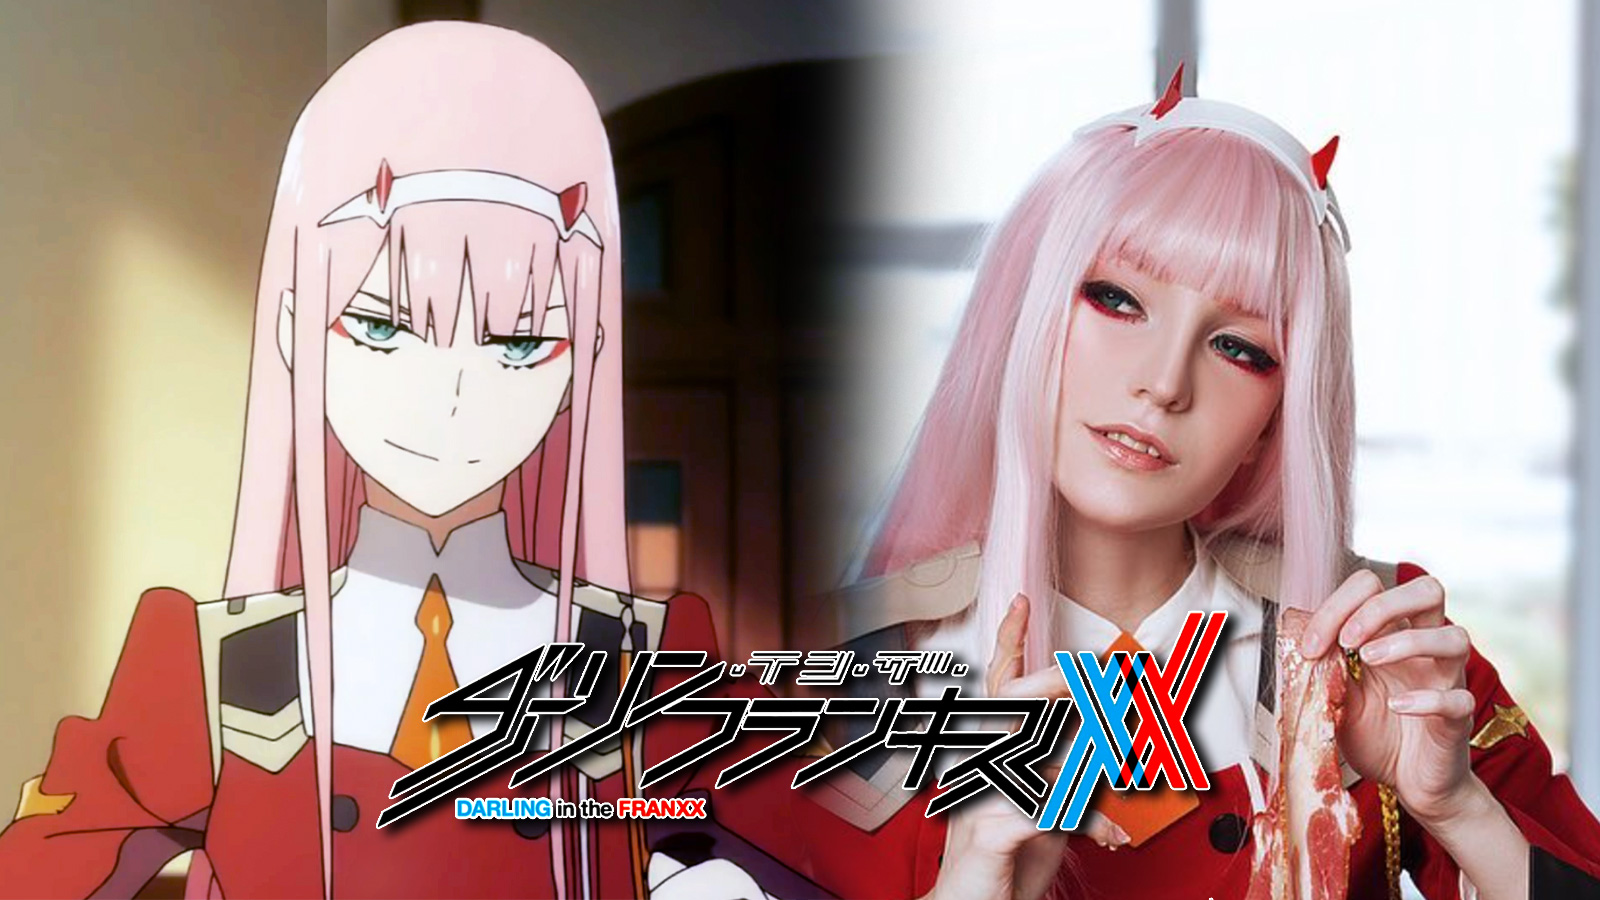 DARLING in the FRANXX - Thoughts so far